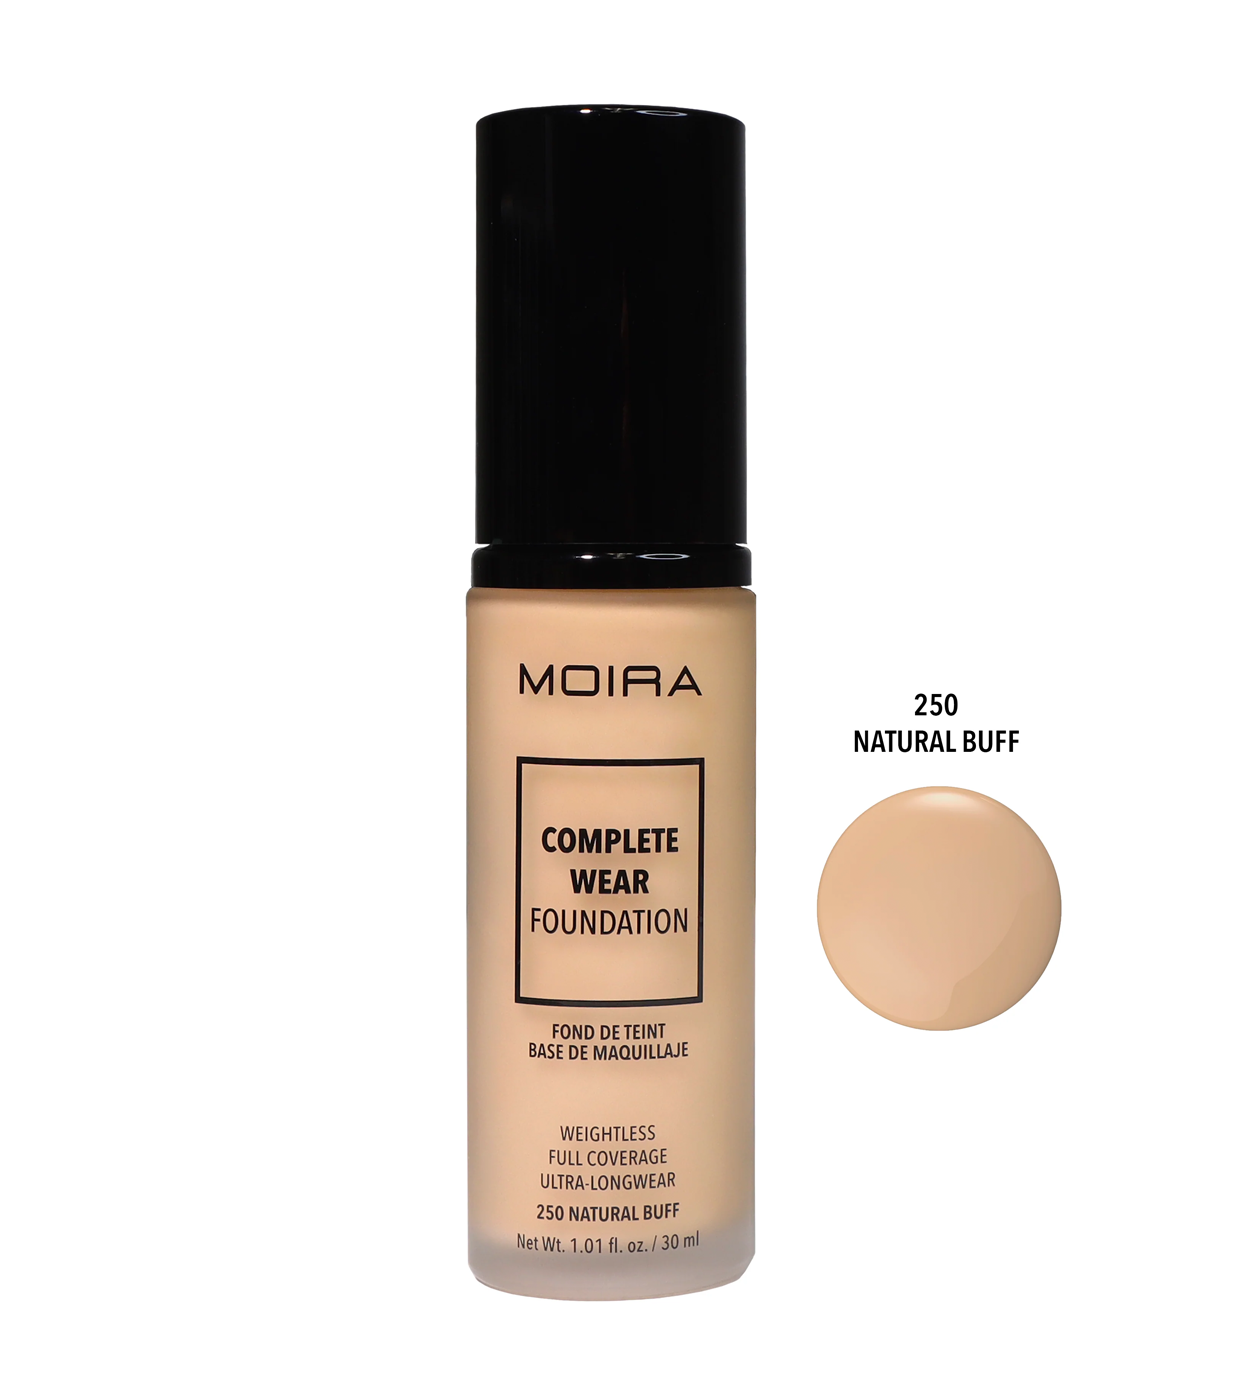 https://www.maquibeauty.pt/images/productos/moira-base-de-maquillaje-fluida-complete-wear-250-natural-buff-1-80627.png